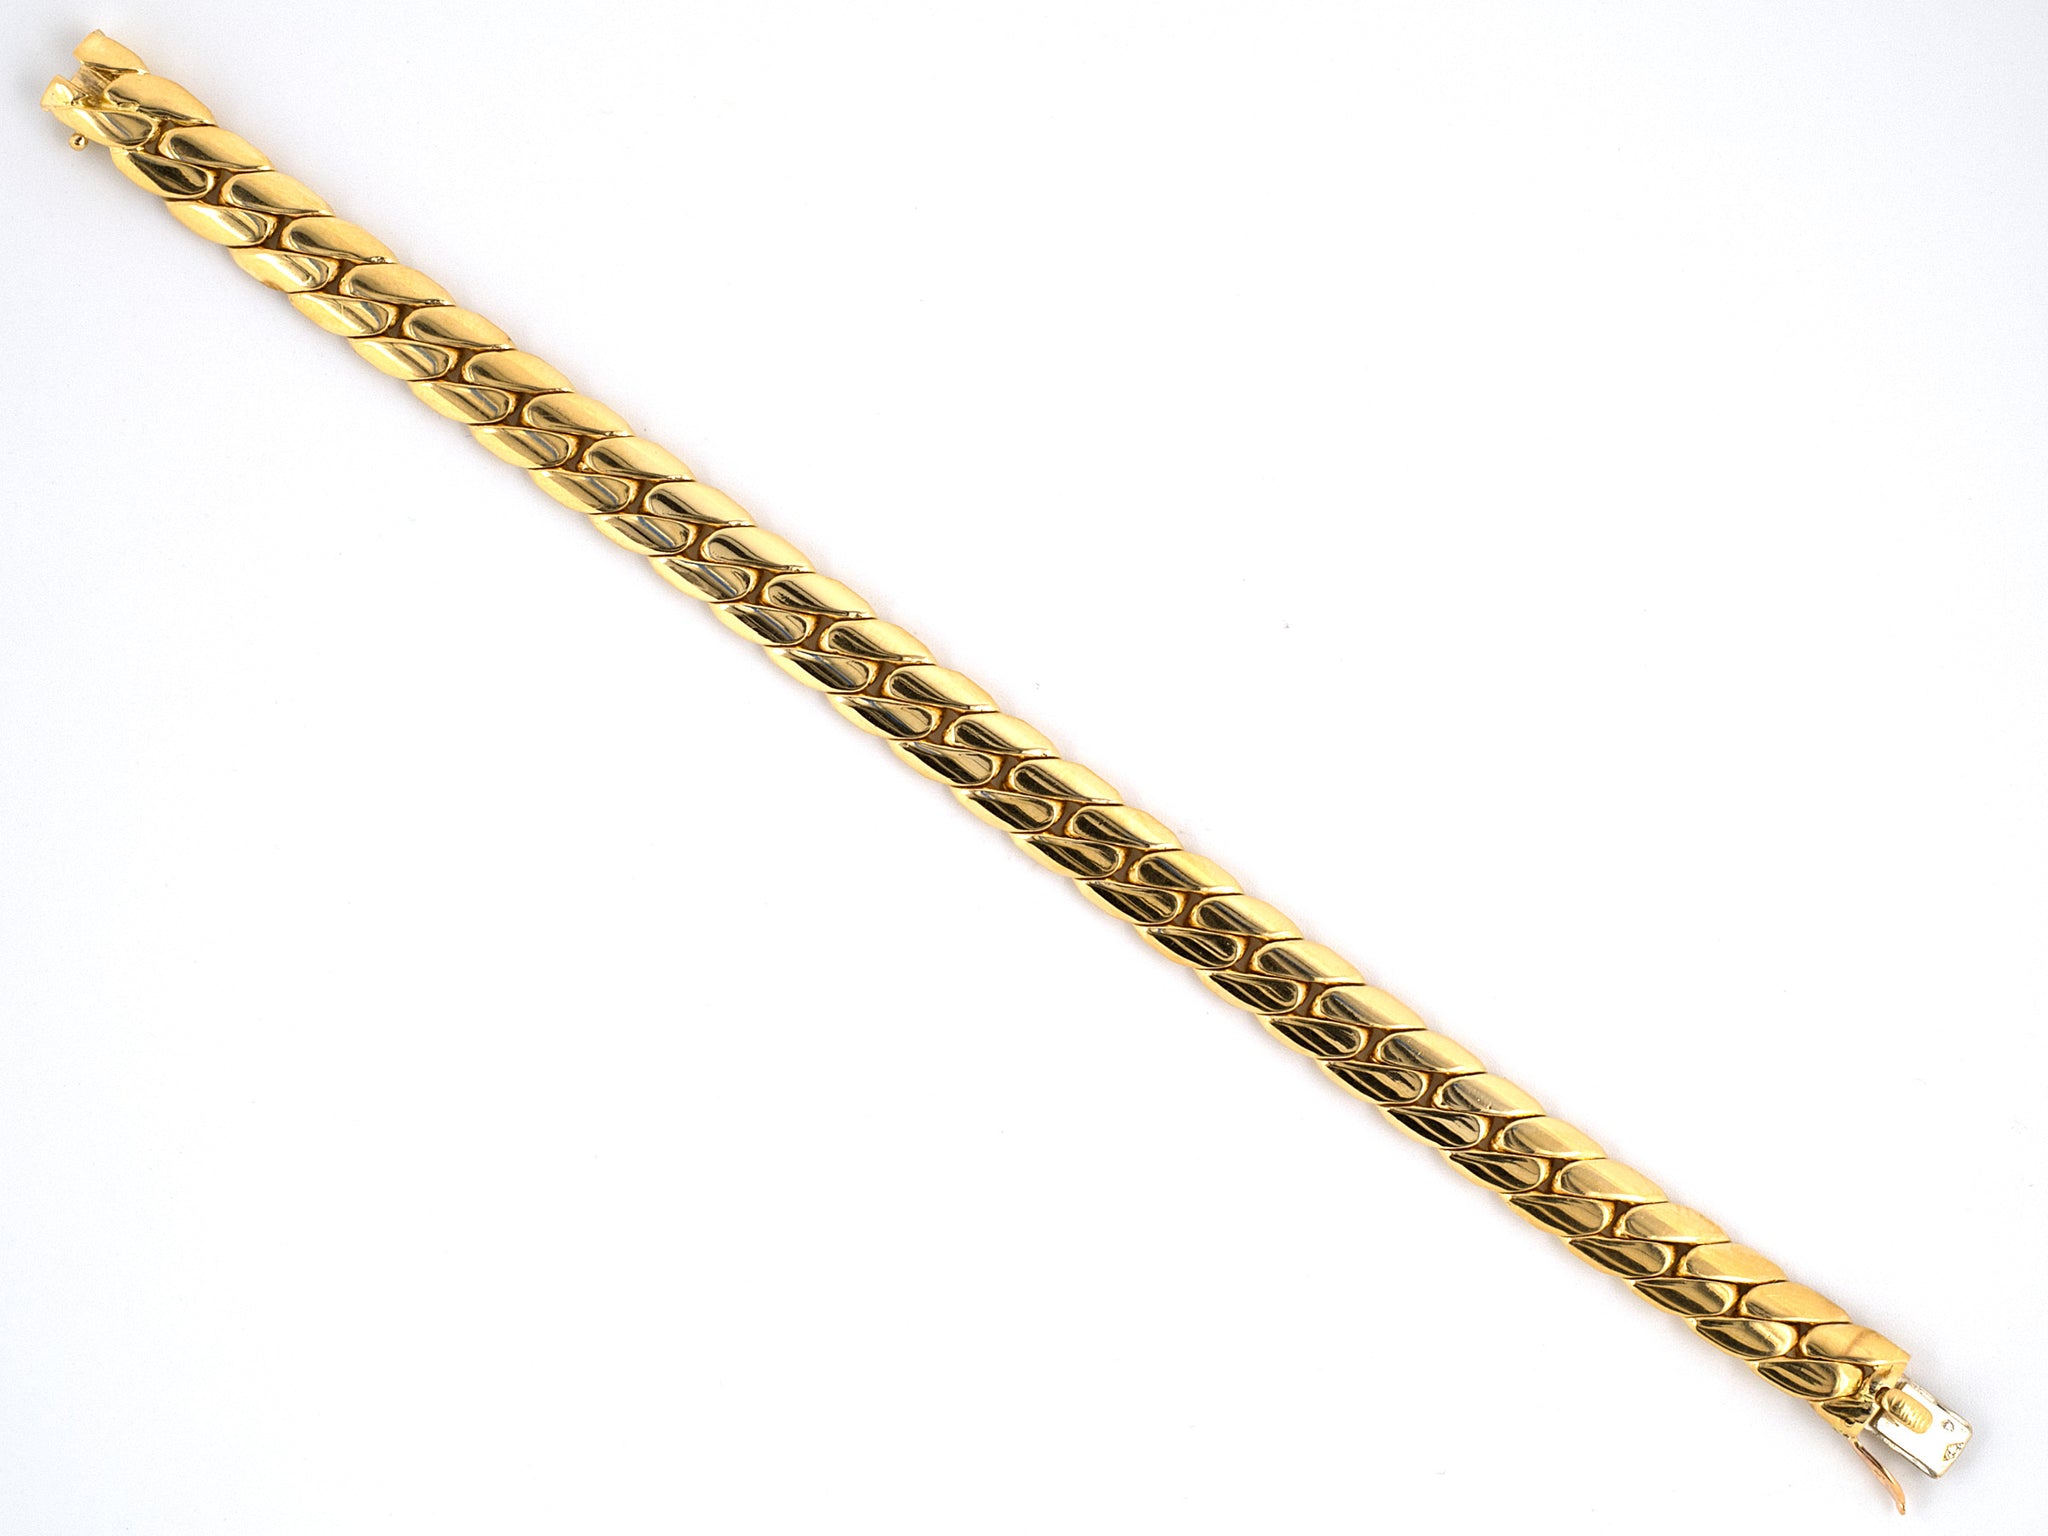 18K Yellow Gold and Diamond Large Oval Link Bracelet by Cartier Paris